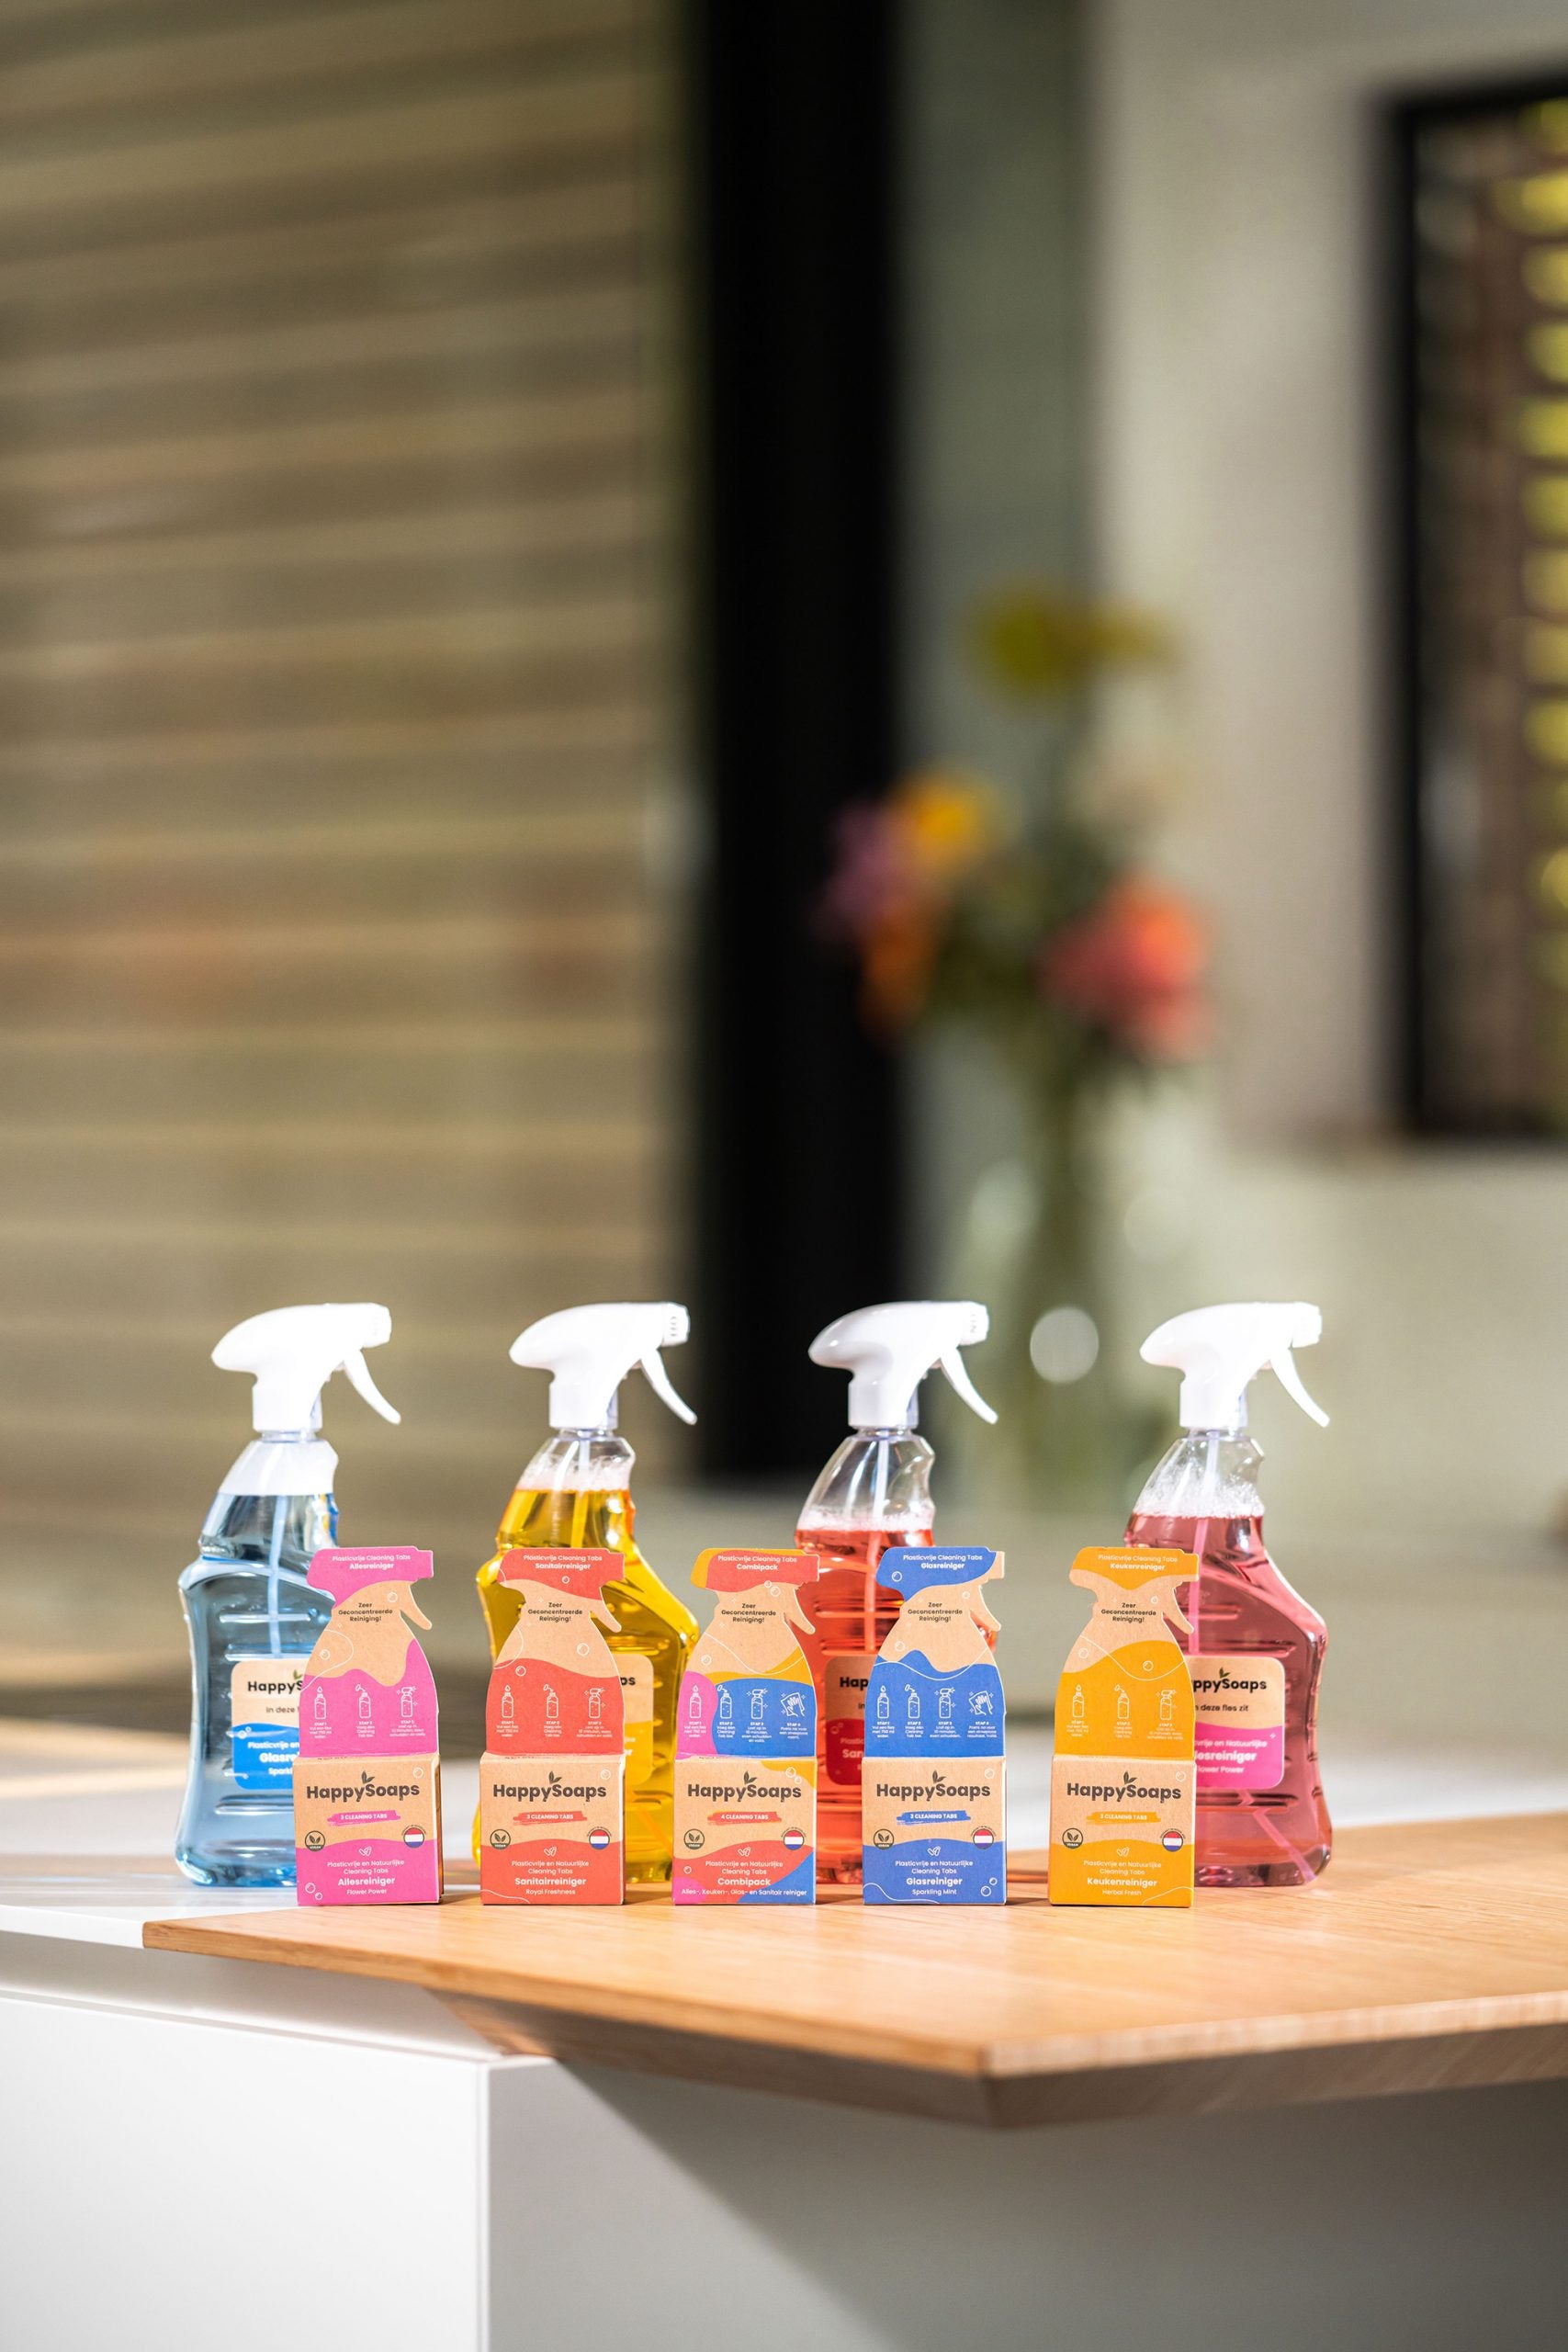 HappySoaps Cleaning Tabs